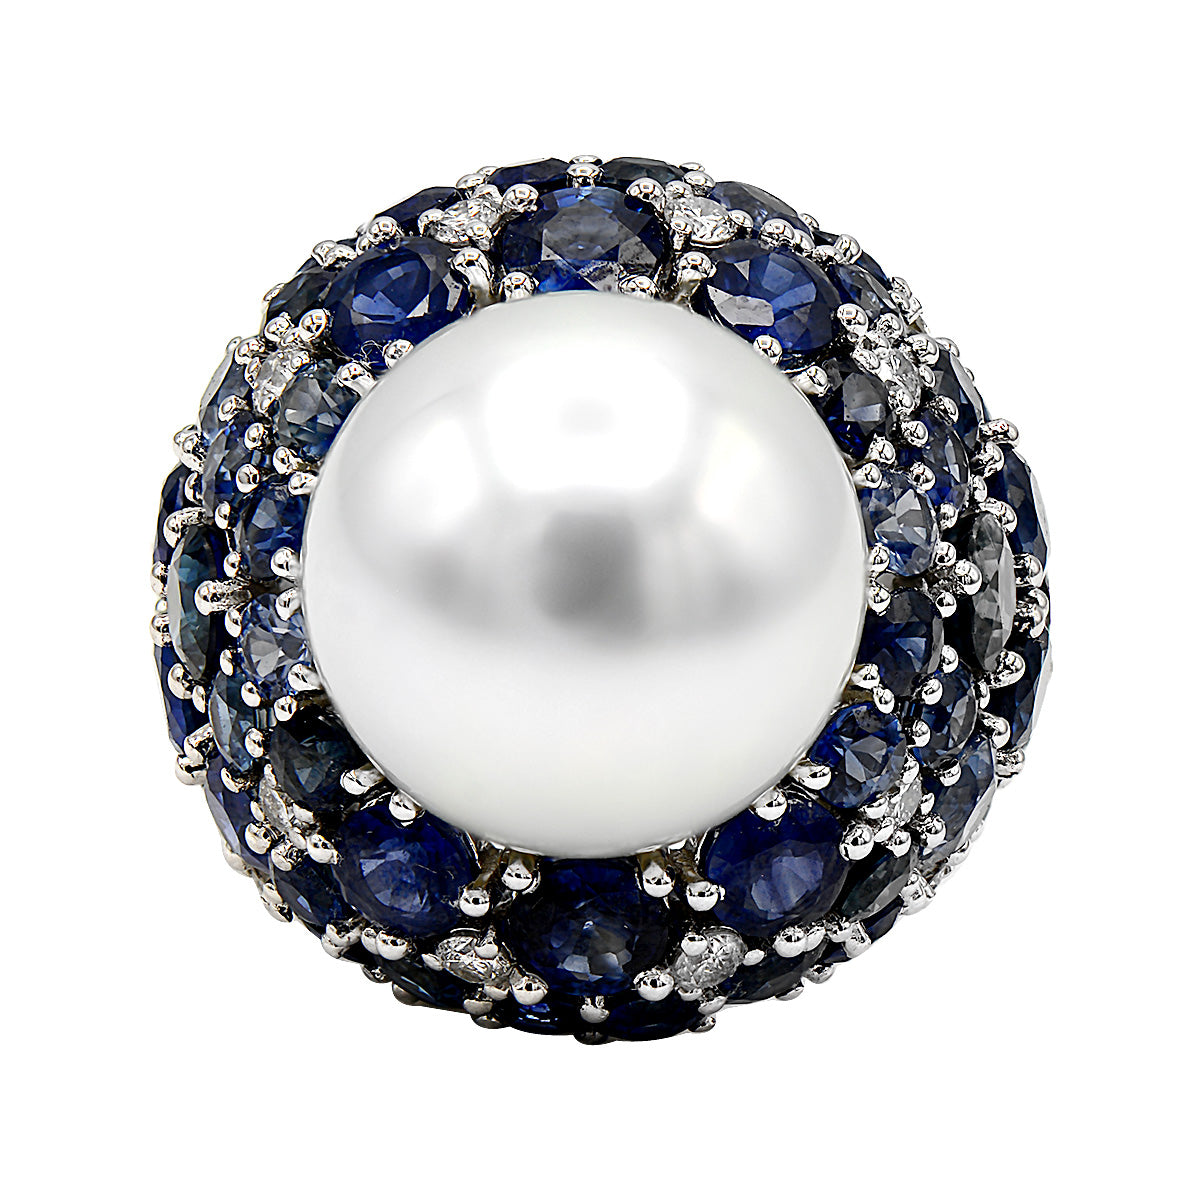 18KW White South Sea Pearl Ring, 14-15mm